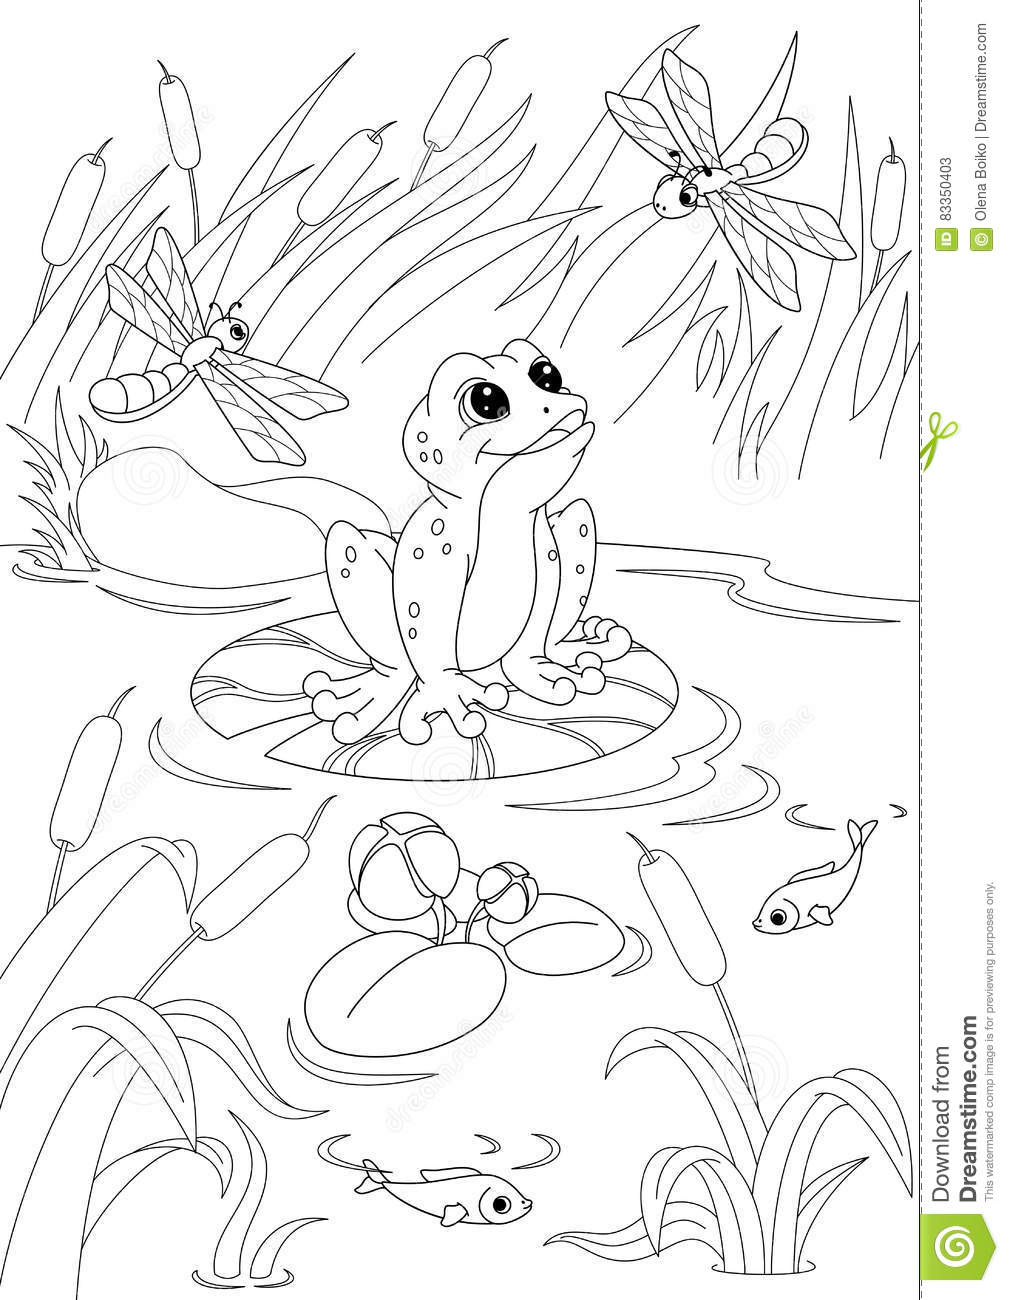 pond coloring pages pond coloring page stock vector illustration of water pond coloring pages 